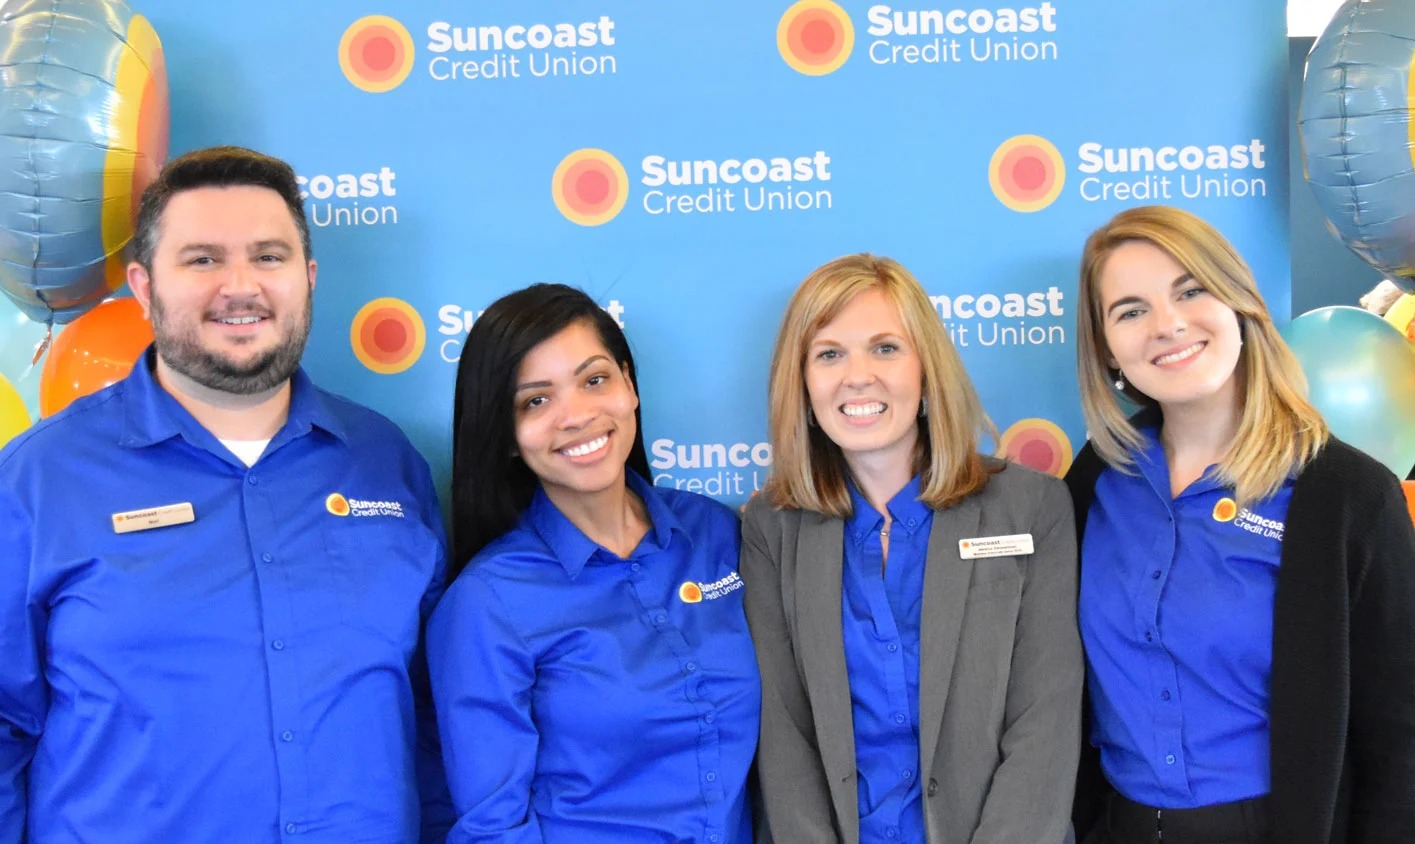 What Time Does Suncoast Credit Union Close Today